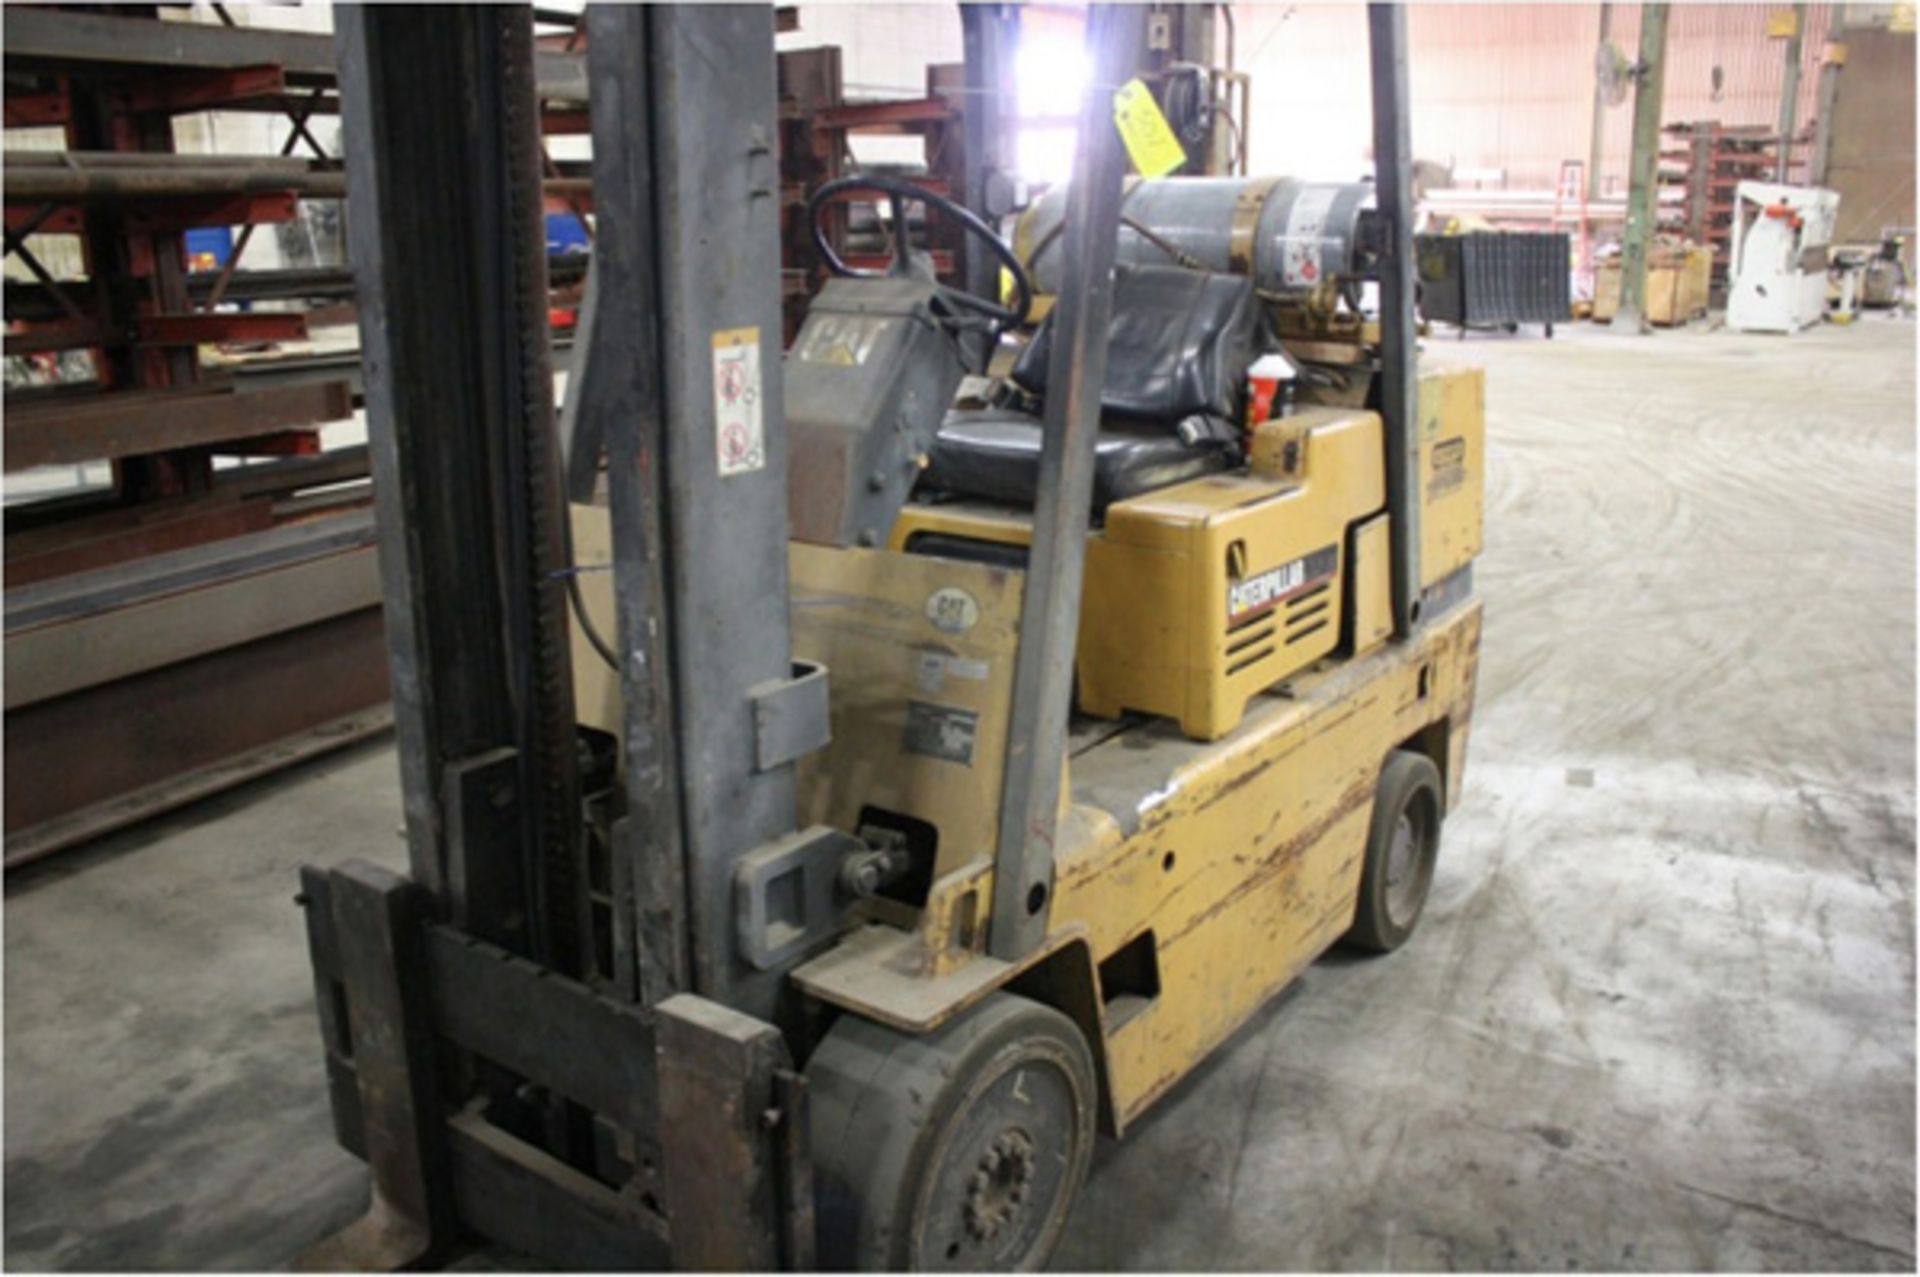 Caterpillar Forklift | 10,000 Lbs., Mdl: T80D, S/N: 5KB04810 - 6365P - Image 2 of 4